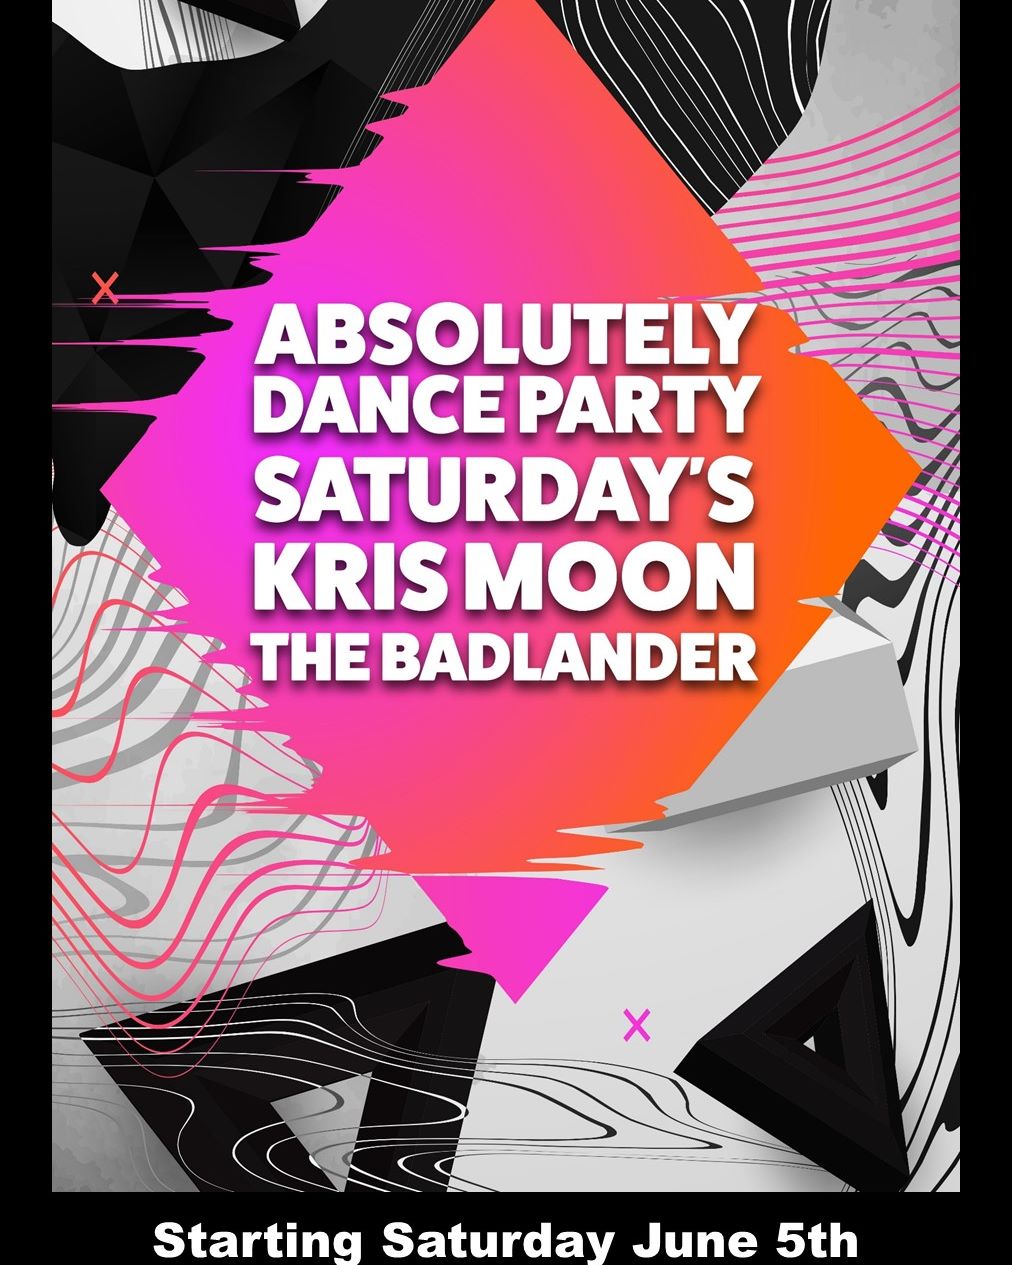 Absolutely Dance Party Saturdays at the Badlander